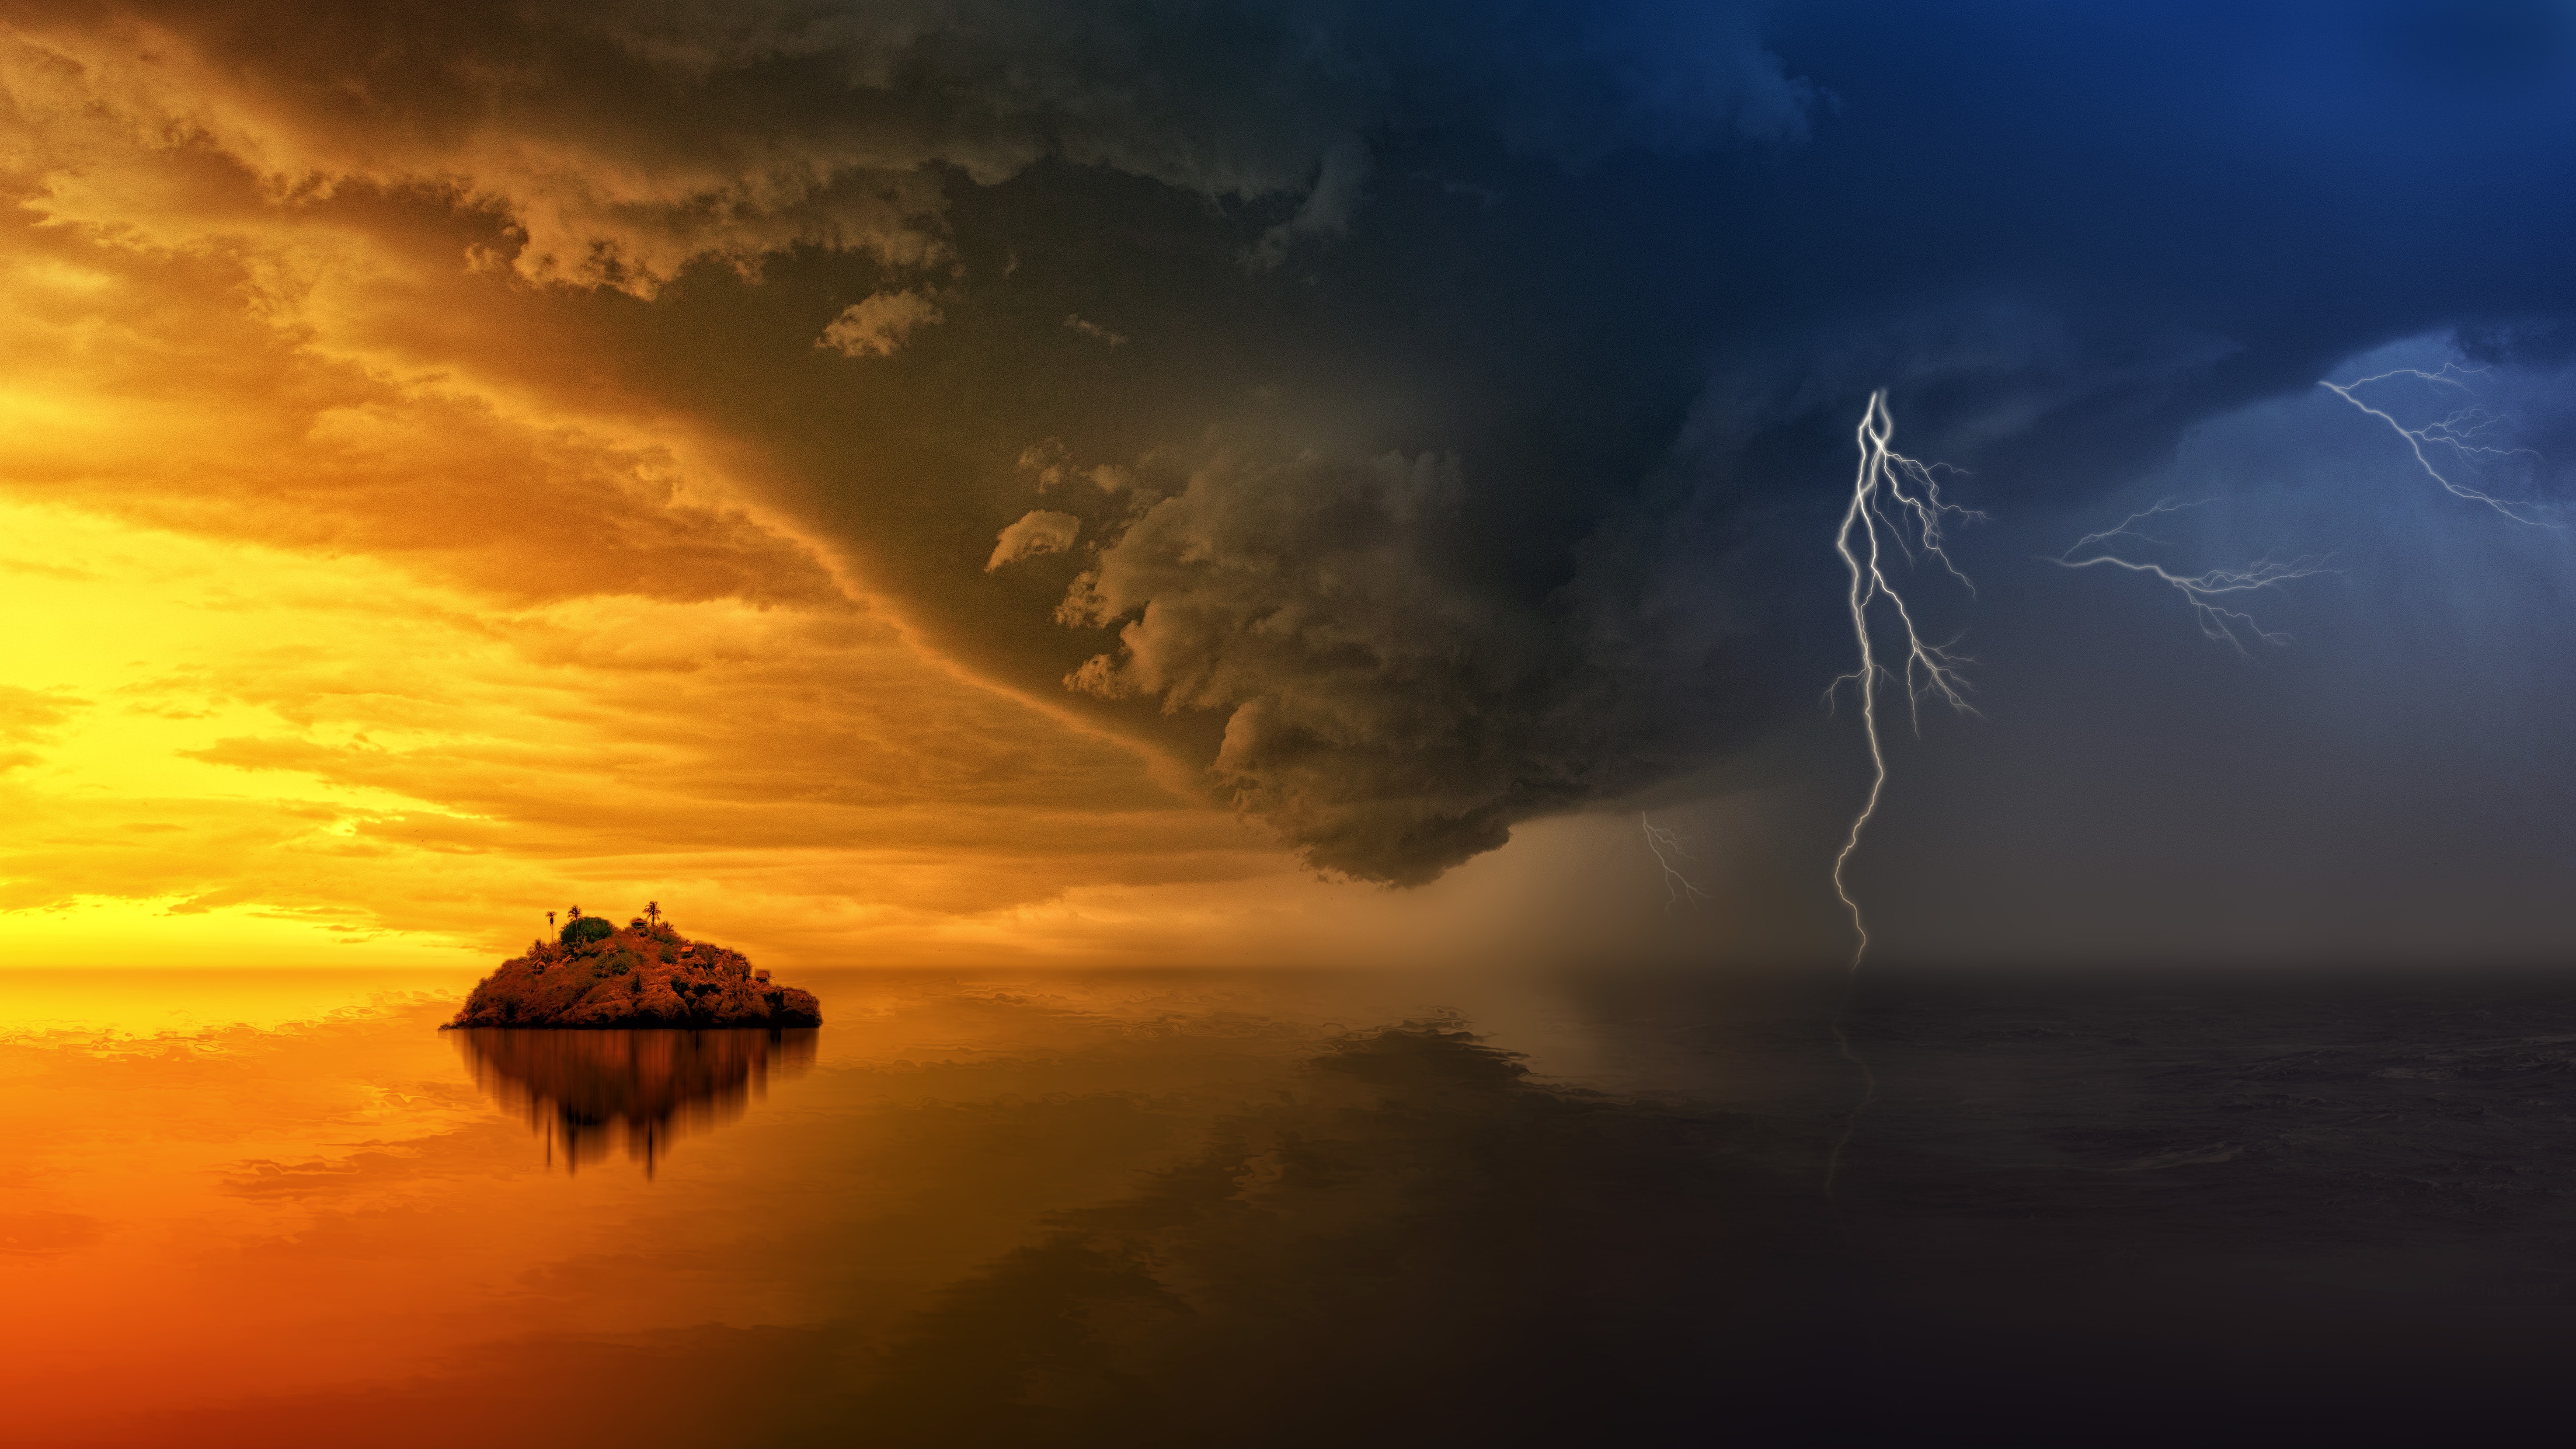 Storm Free , HD Wallpaper & Backgrounds